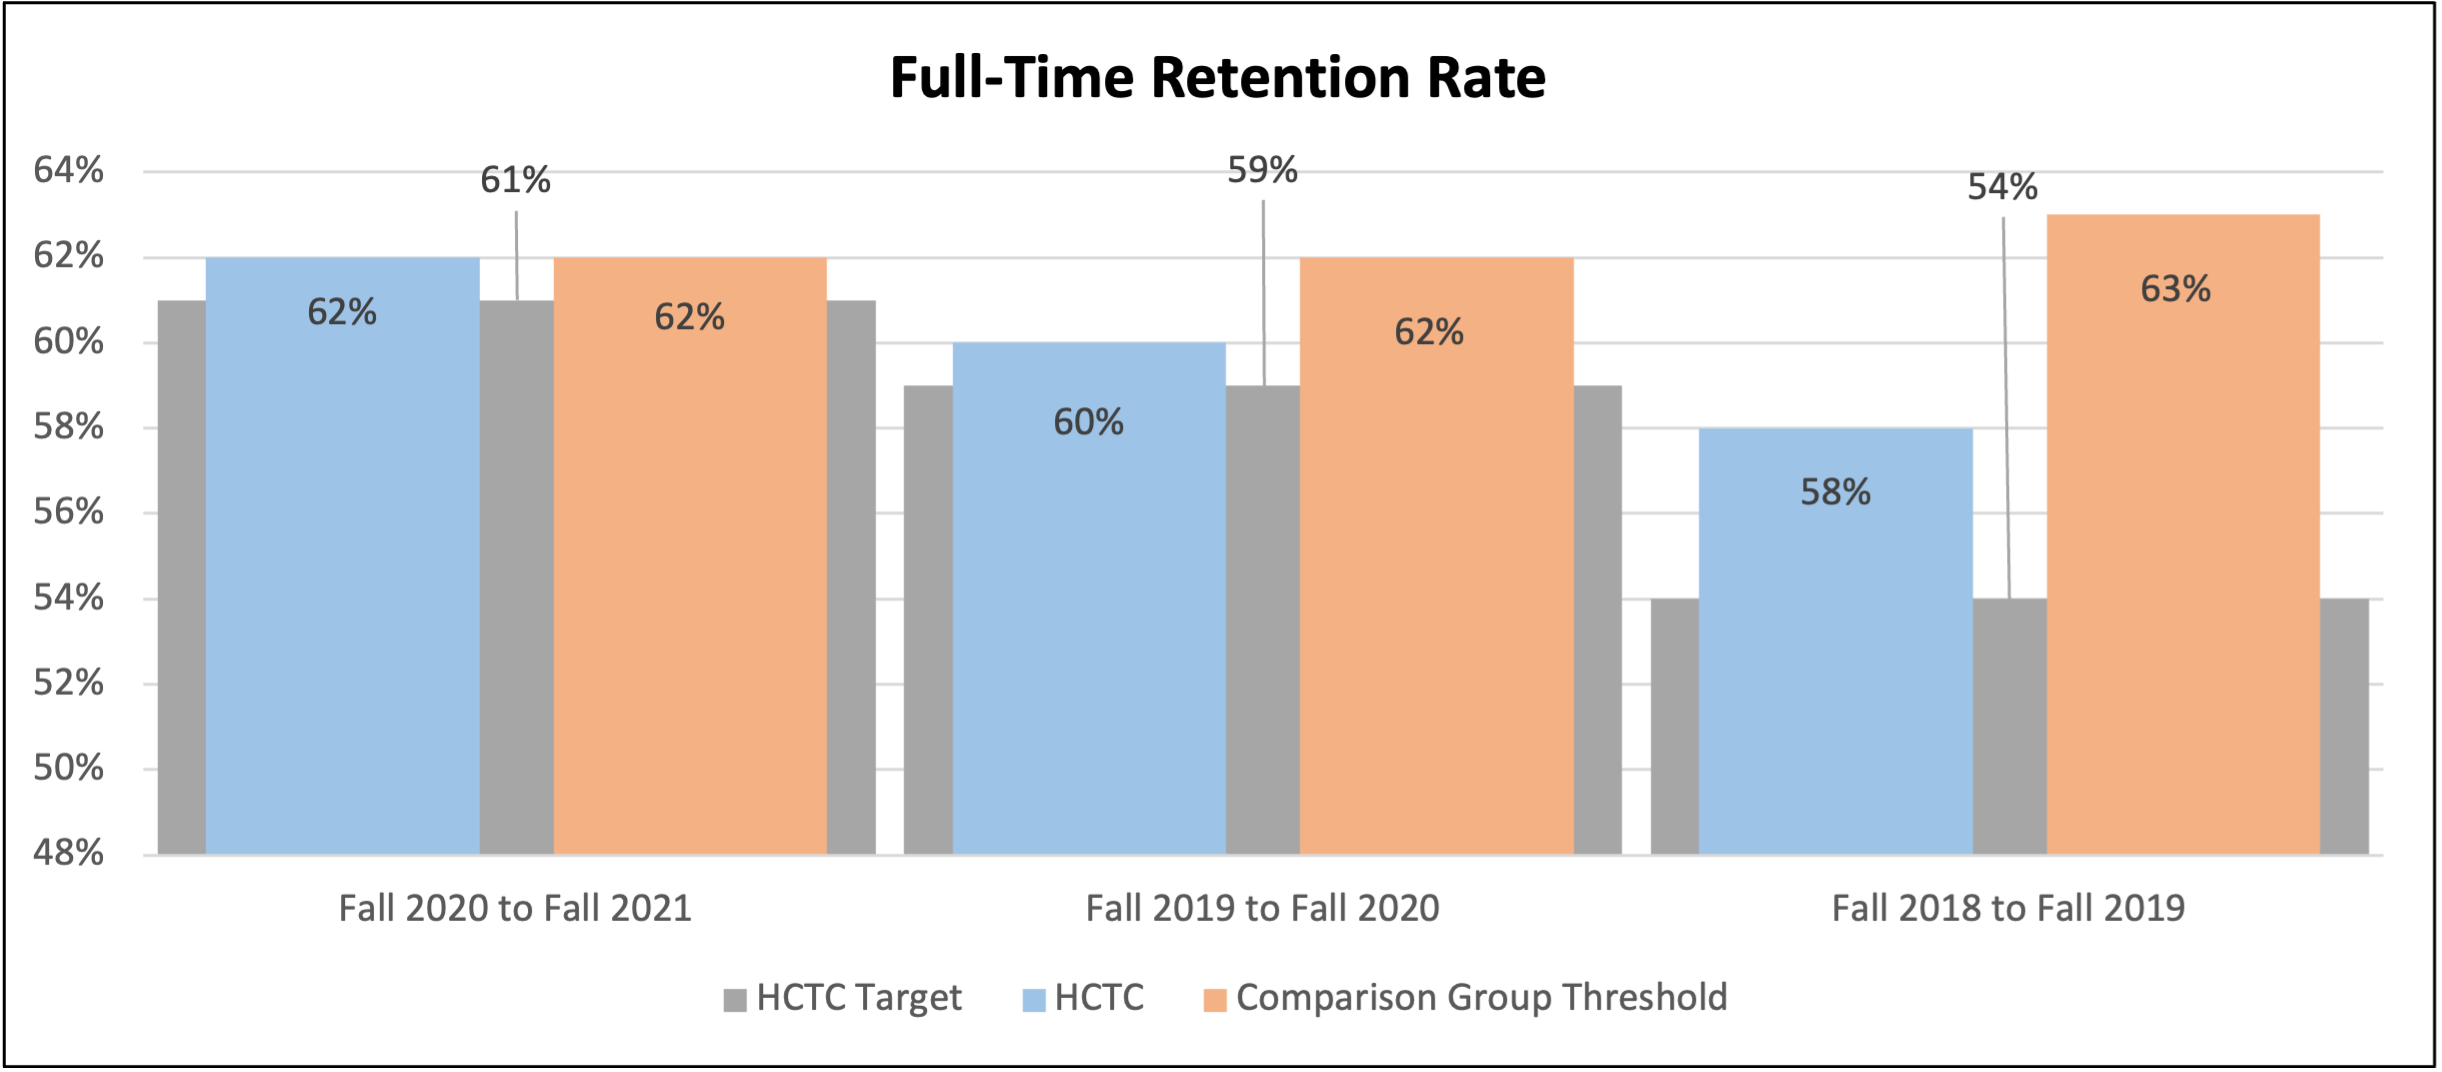 Full-Time Retention Rate: Measured by the percentage of full-time, first-time degree/certificate-seeking students from the previous summer/fall who either re-enrolled or successfully completed their program by the current fall.